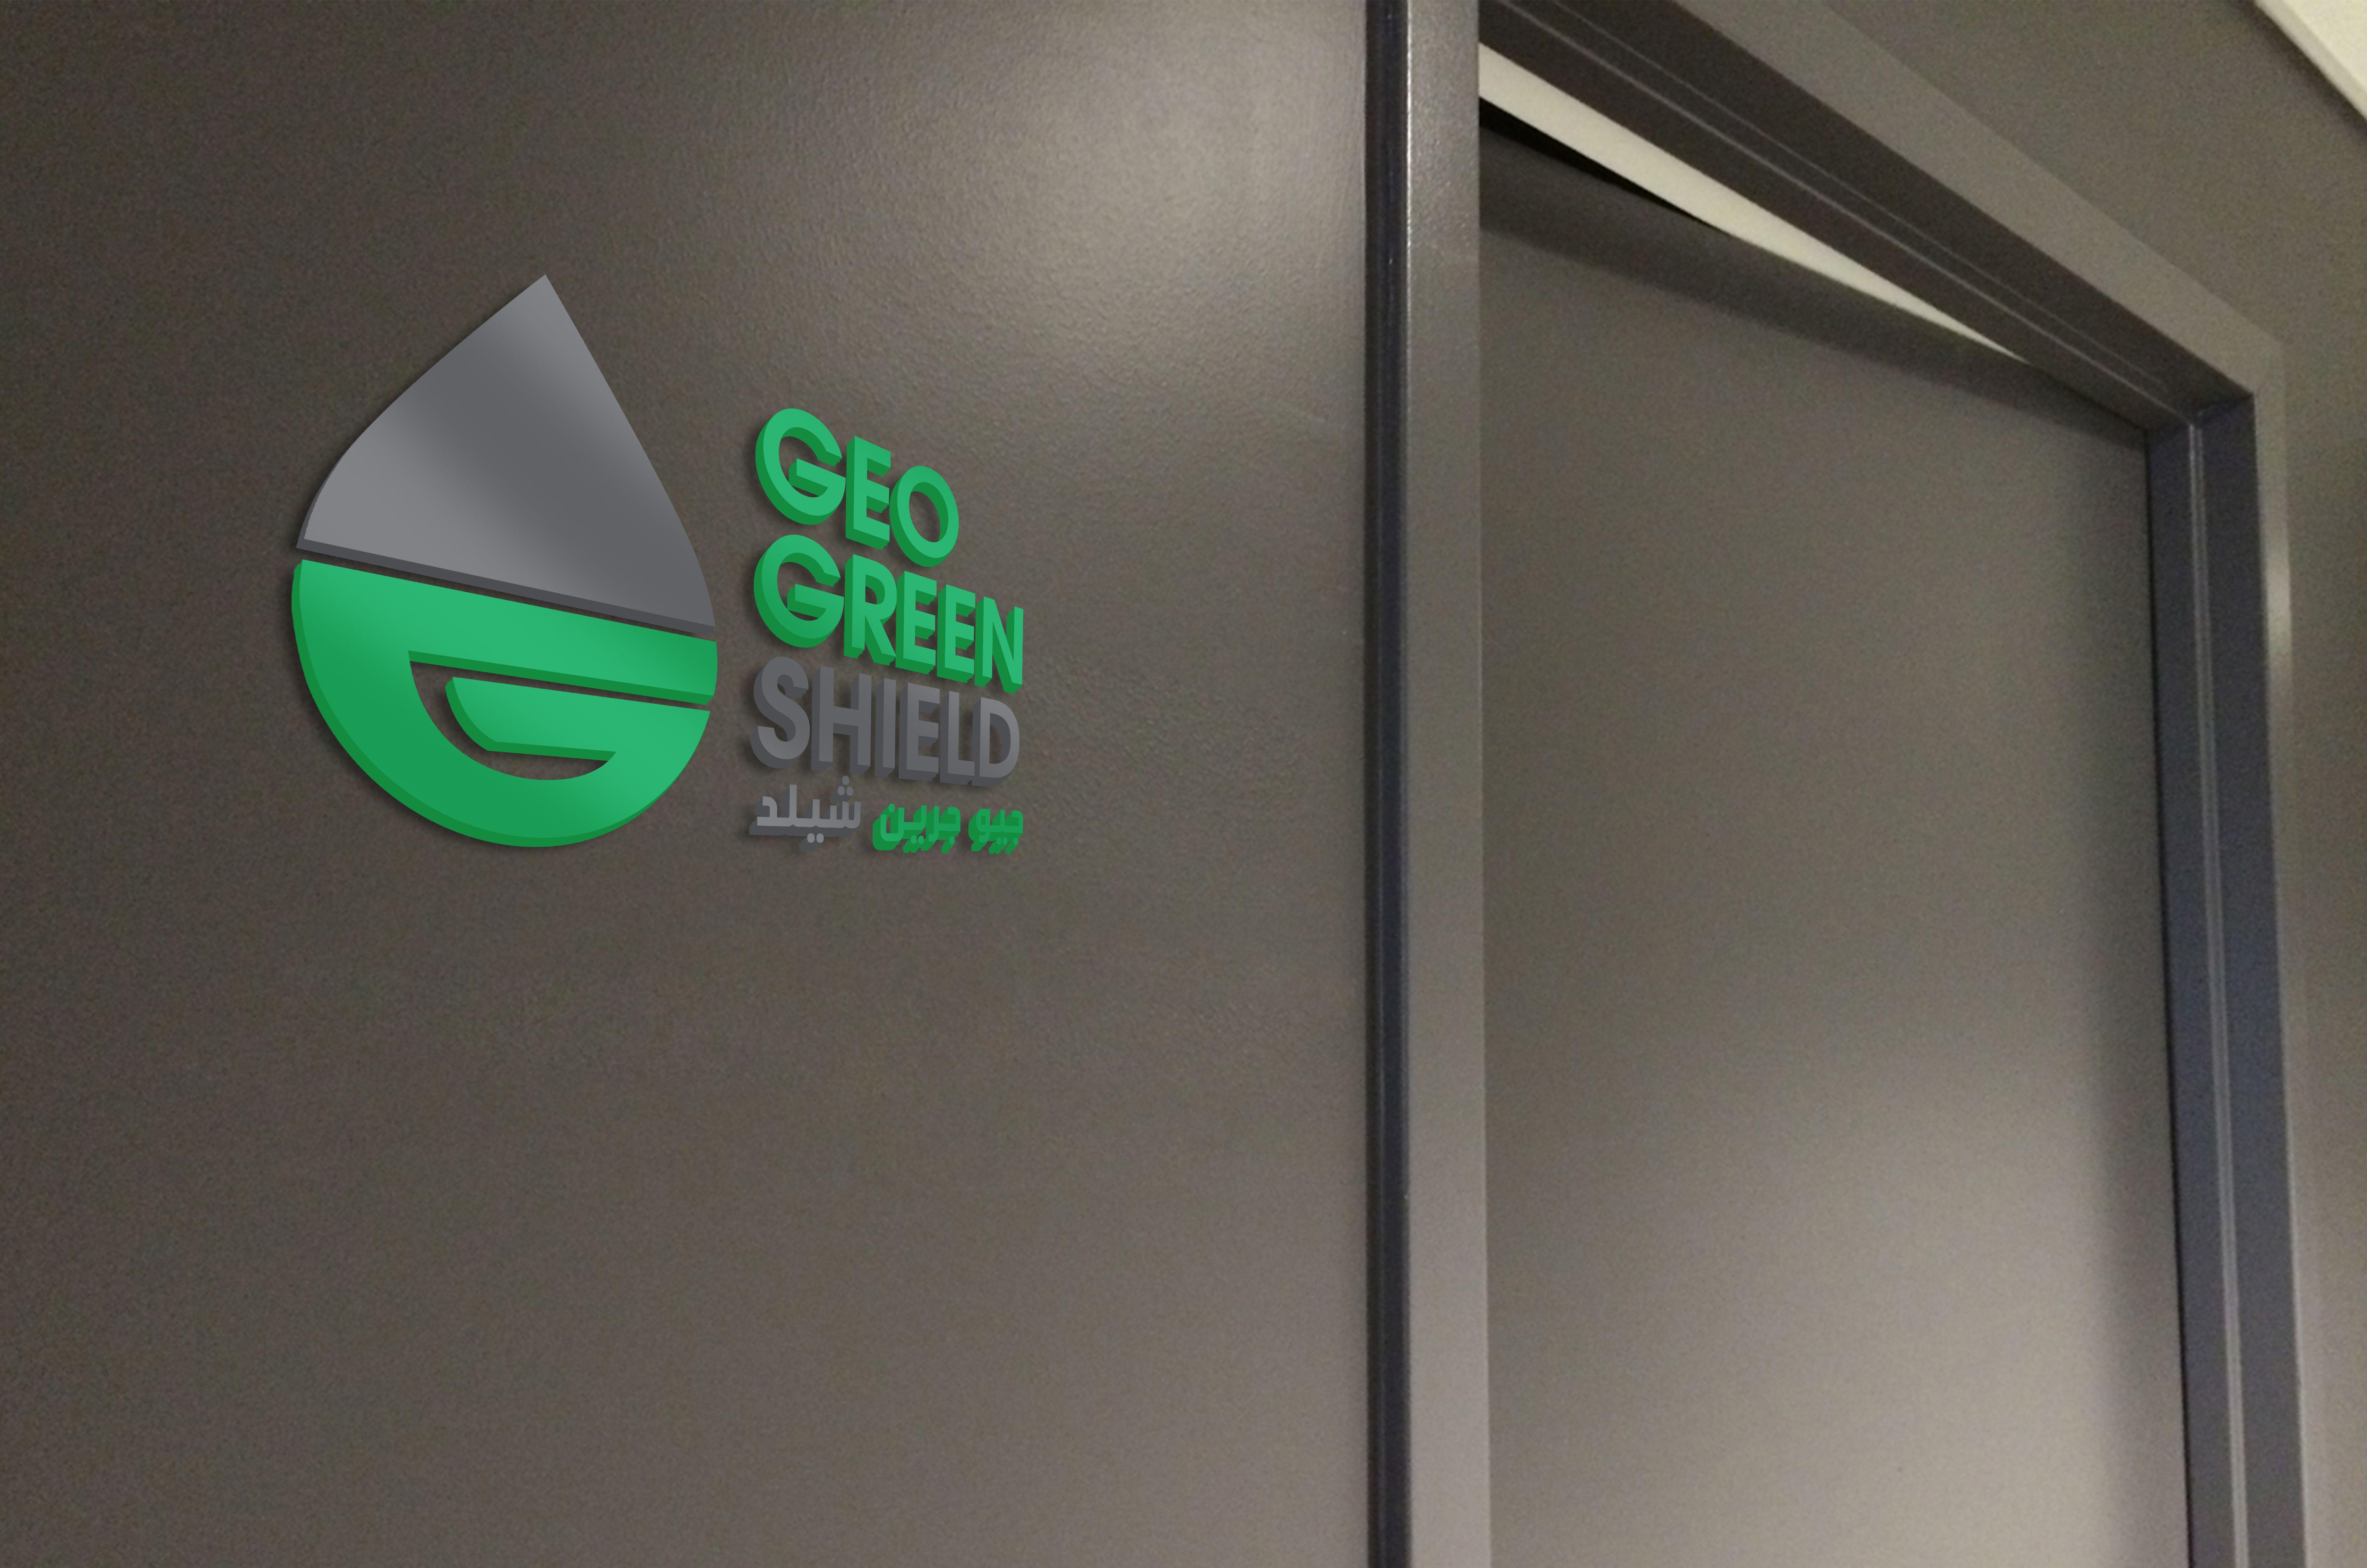 Green Shield with Company Logo - Our new work, Client: GEO GREEN SHIELD Company branding. Logo